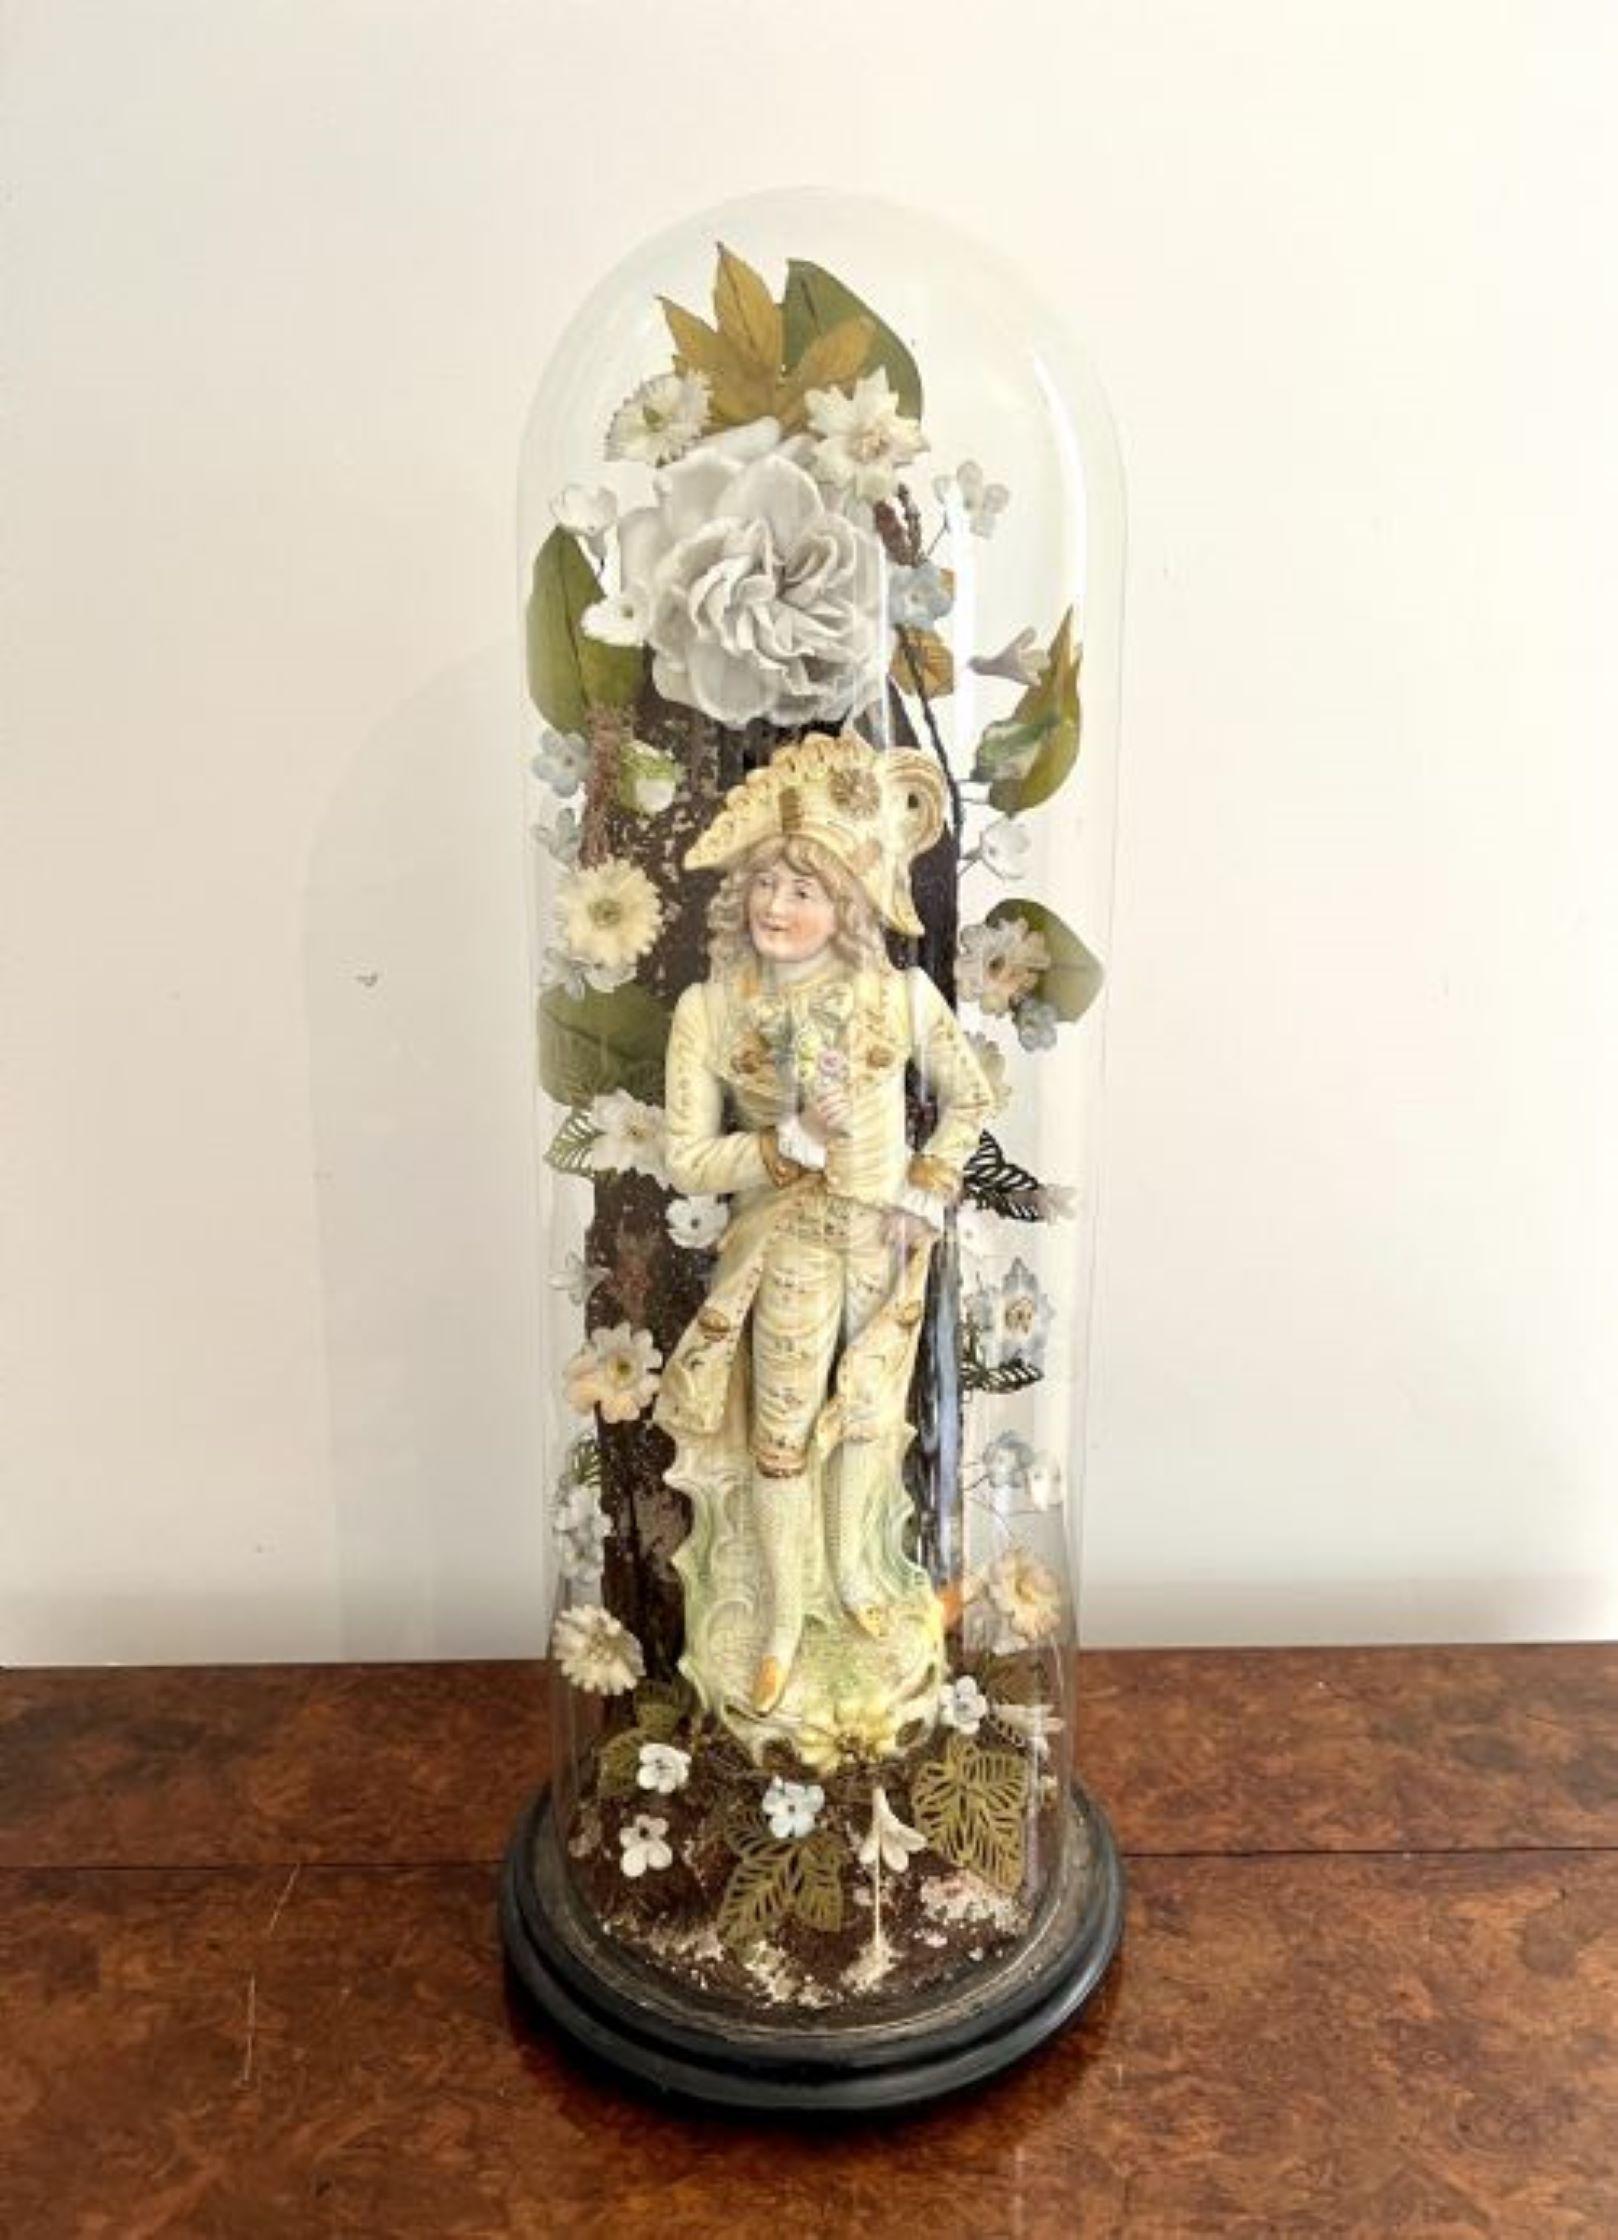 Outstanding quality pair of antique Victorian continental figures with the original glass domes having a quality pair of antique Victorian continental figures surrounded by decretive flowers and foliage in stunning blue, green, white and gold